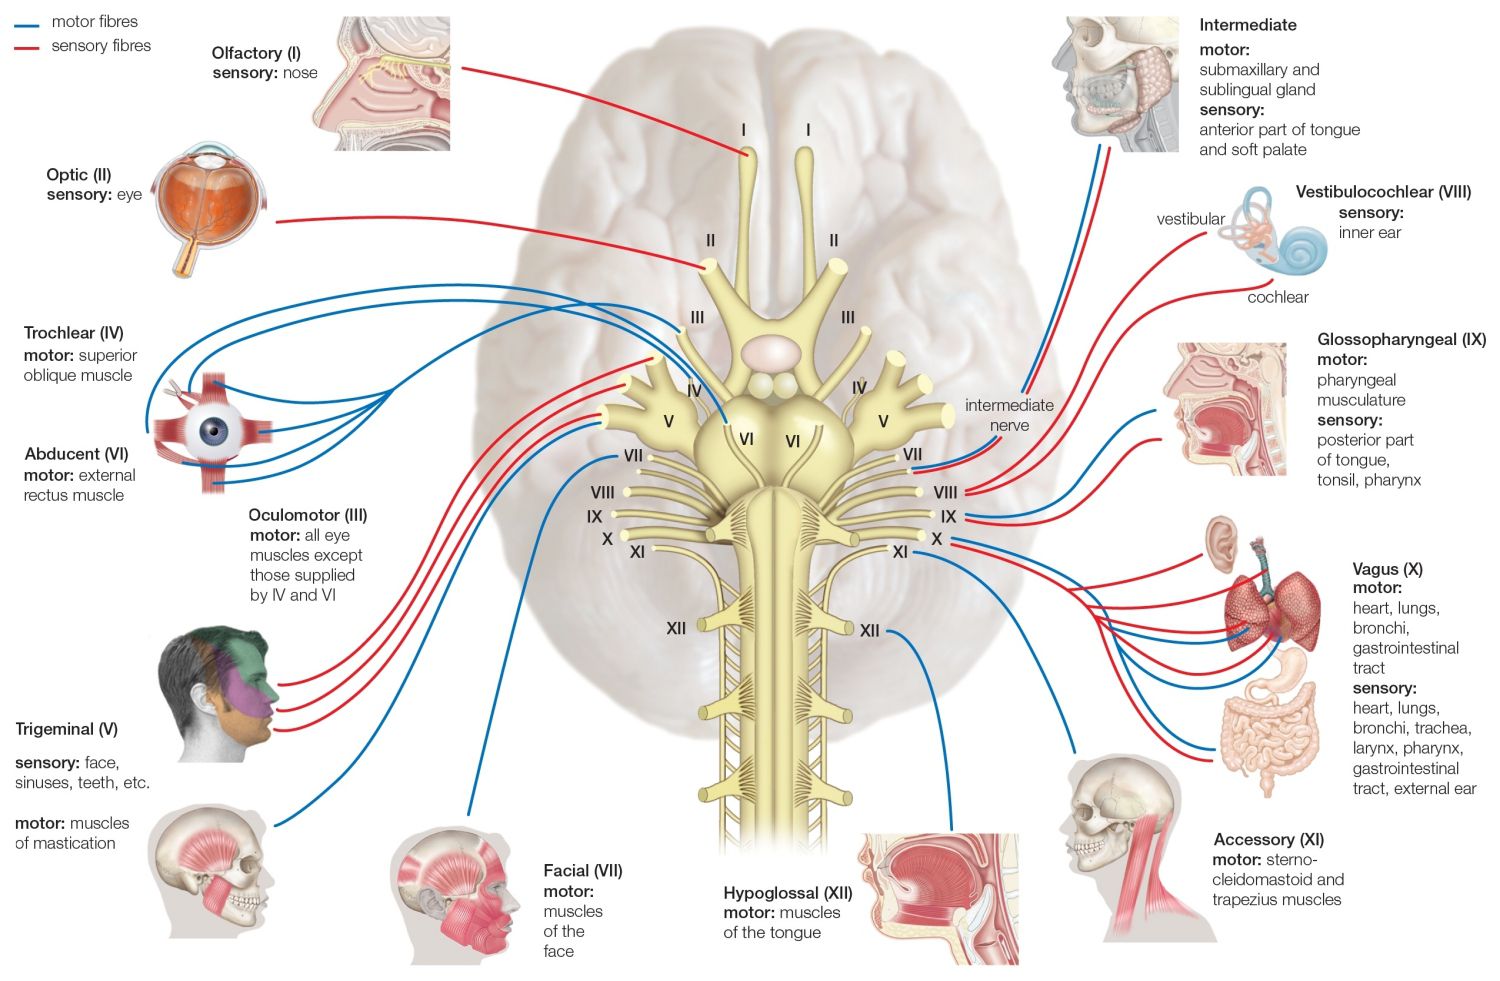 Names, Functions, and Locations of Cranial Nerves